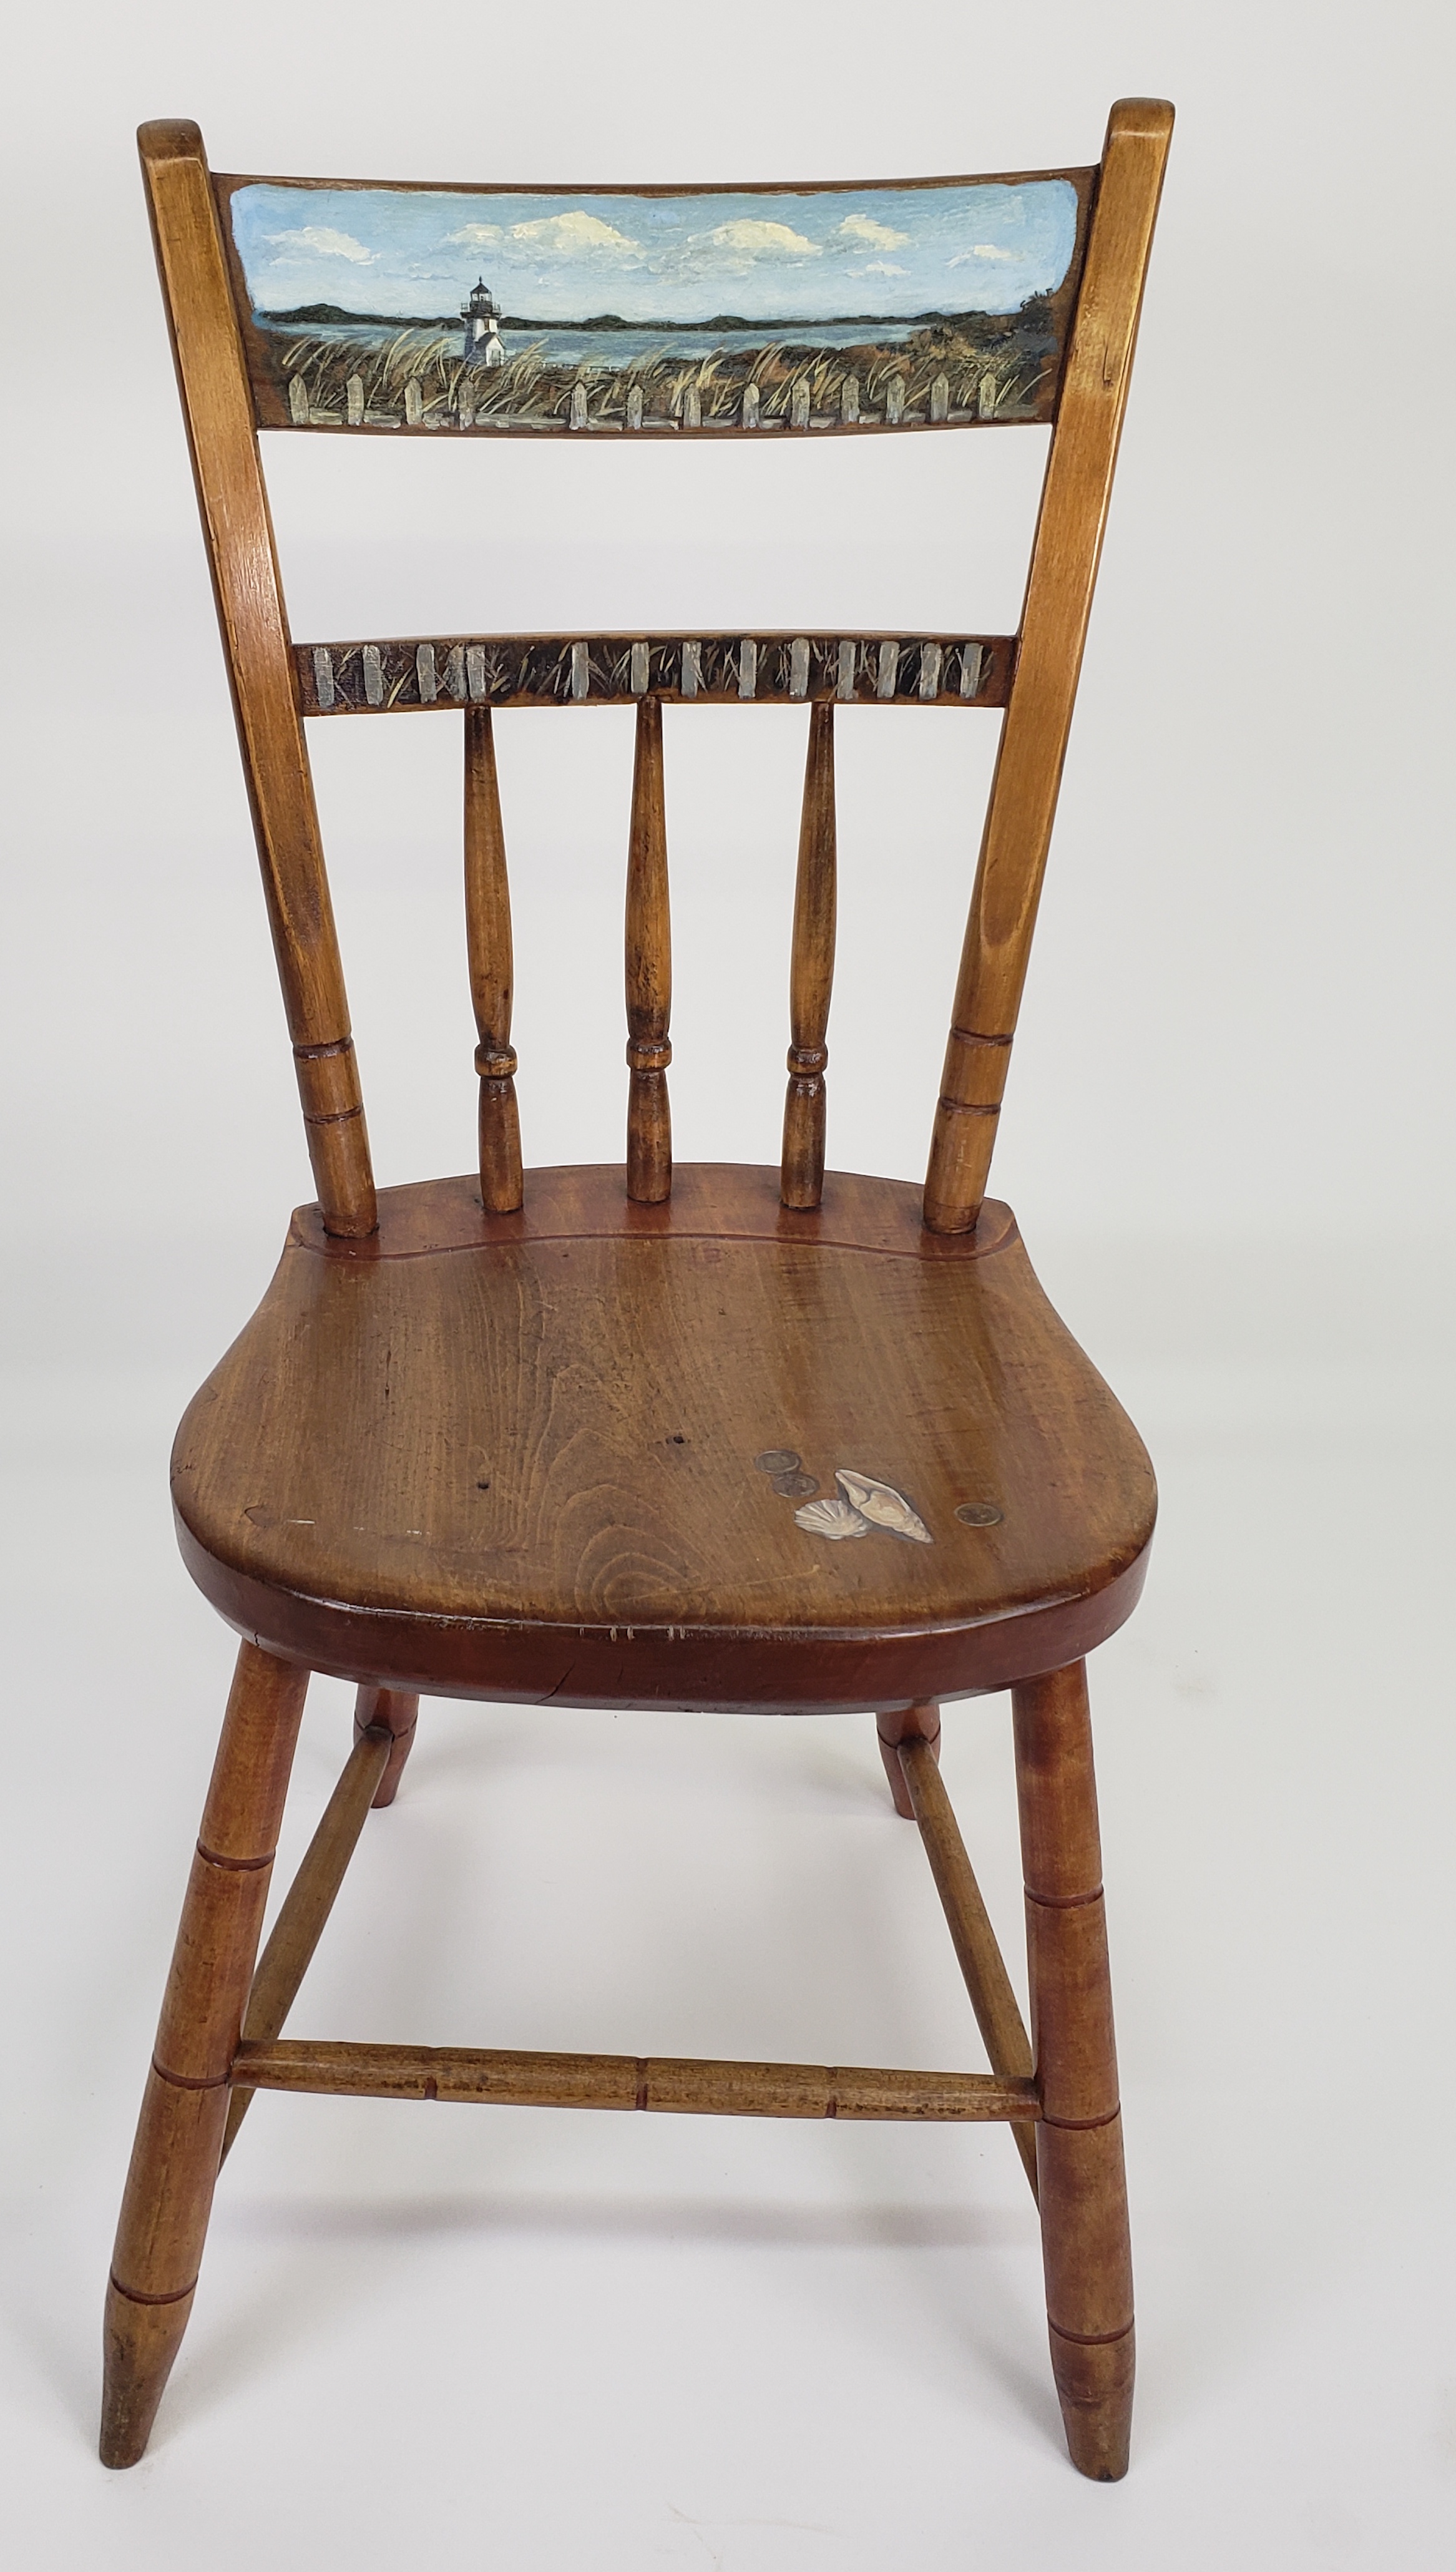 Brant Point Nantucket Paint Decorated Thumbback Windsor Chair